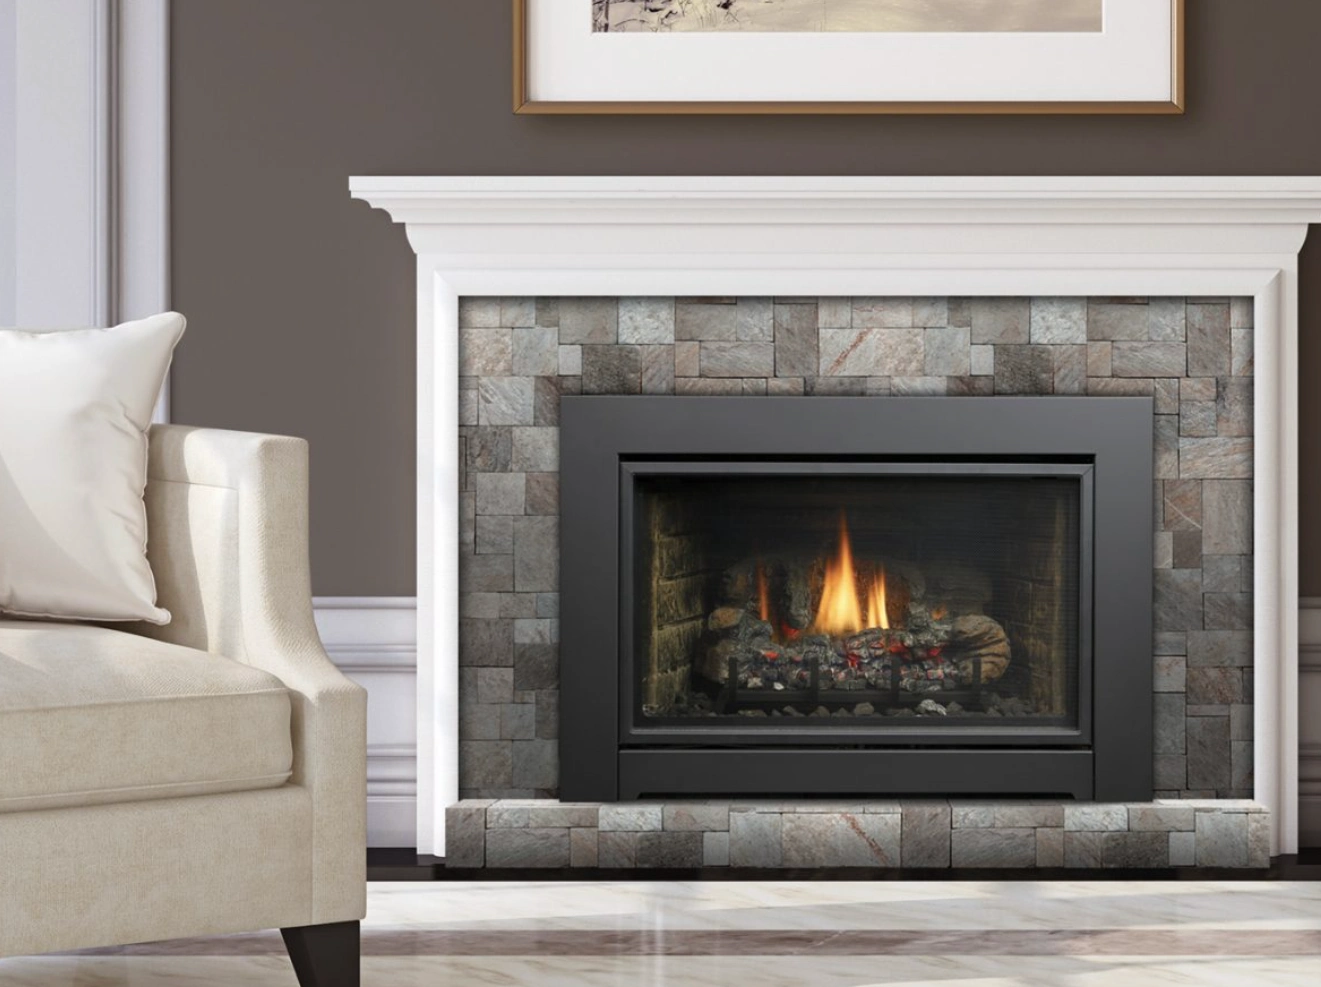 Fireplace with Stone Tile Mantle